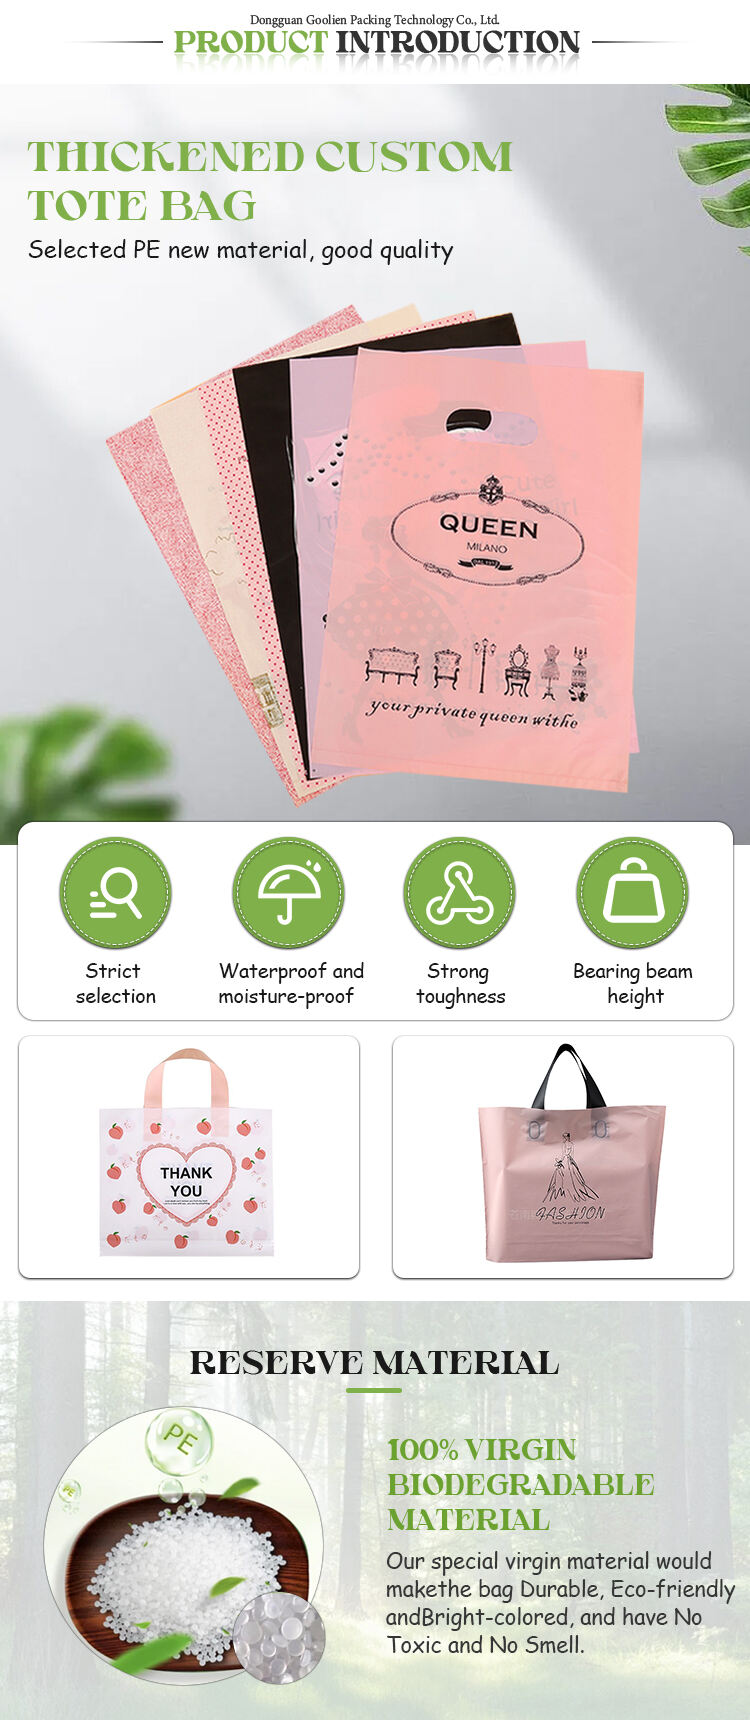 Custom Recyclable Polypropylene Tote Die Cut Handle Carry Bag D Cut Plastic Promotion Shopping Bag For Department Store supplier